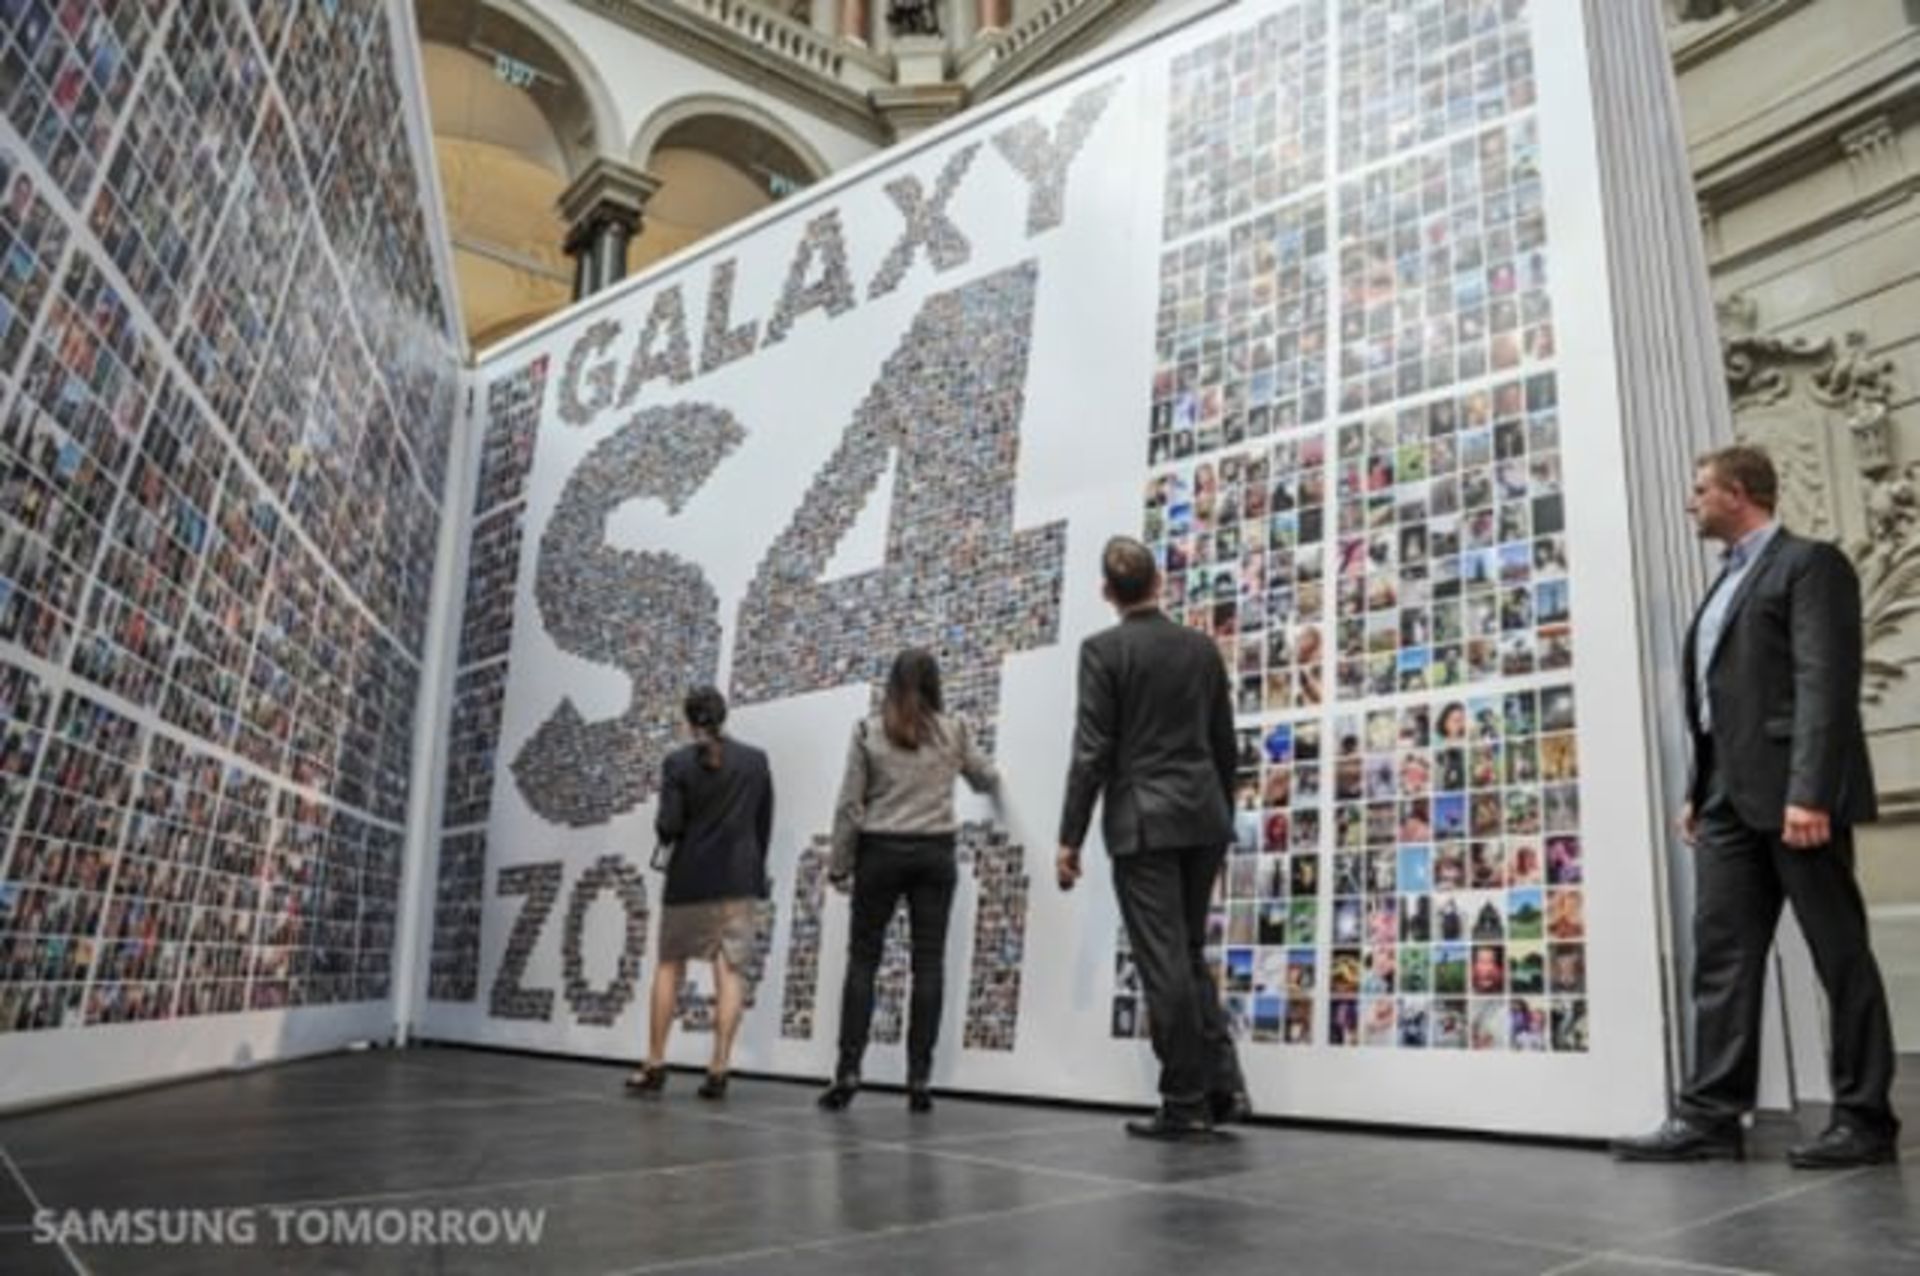 Samsung-Prints-a-New-Guinness-World-Record 02-638x424